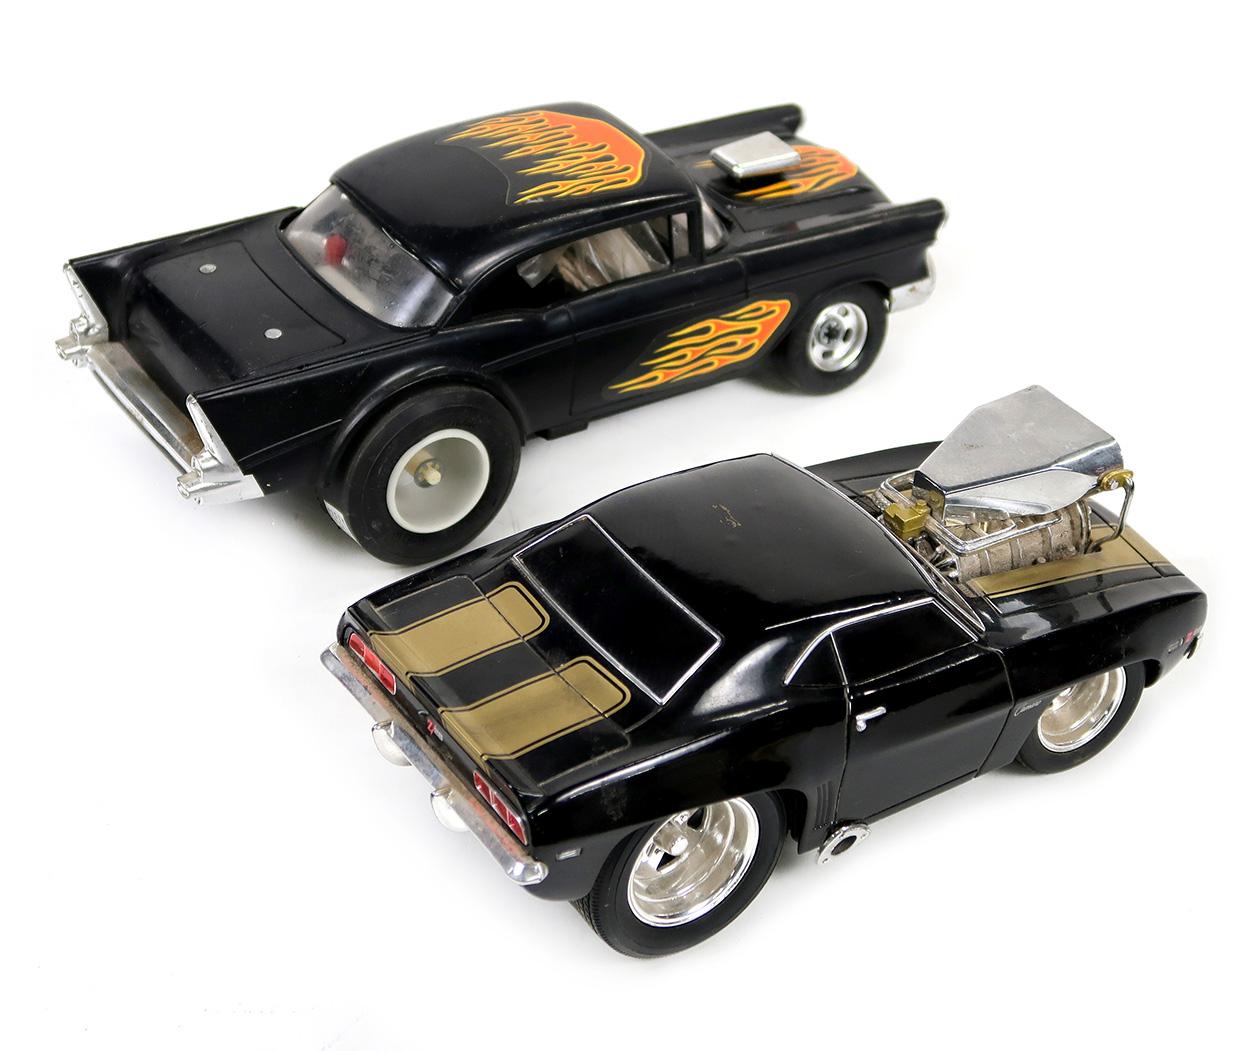 Toy Scale Models (2), 1969 Chevy Camaro Black Z28 Muscle Machine Hot Rod Dr